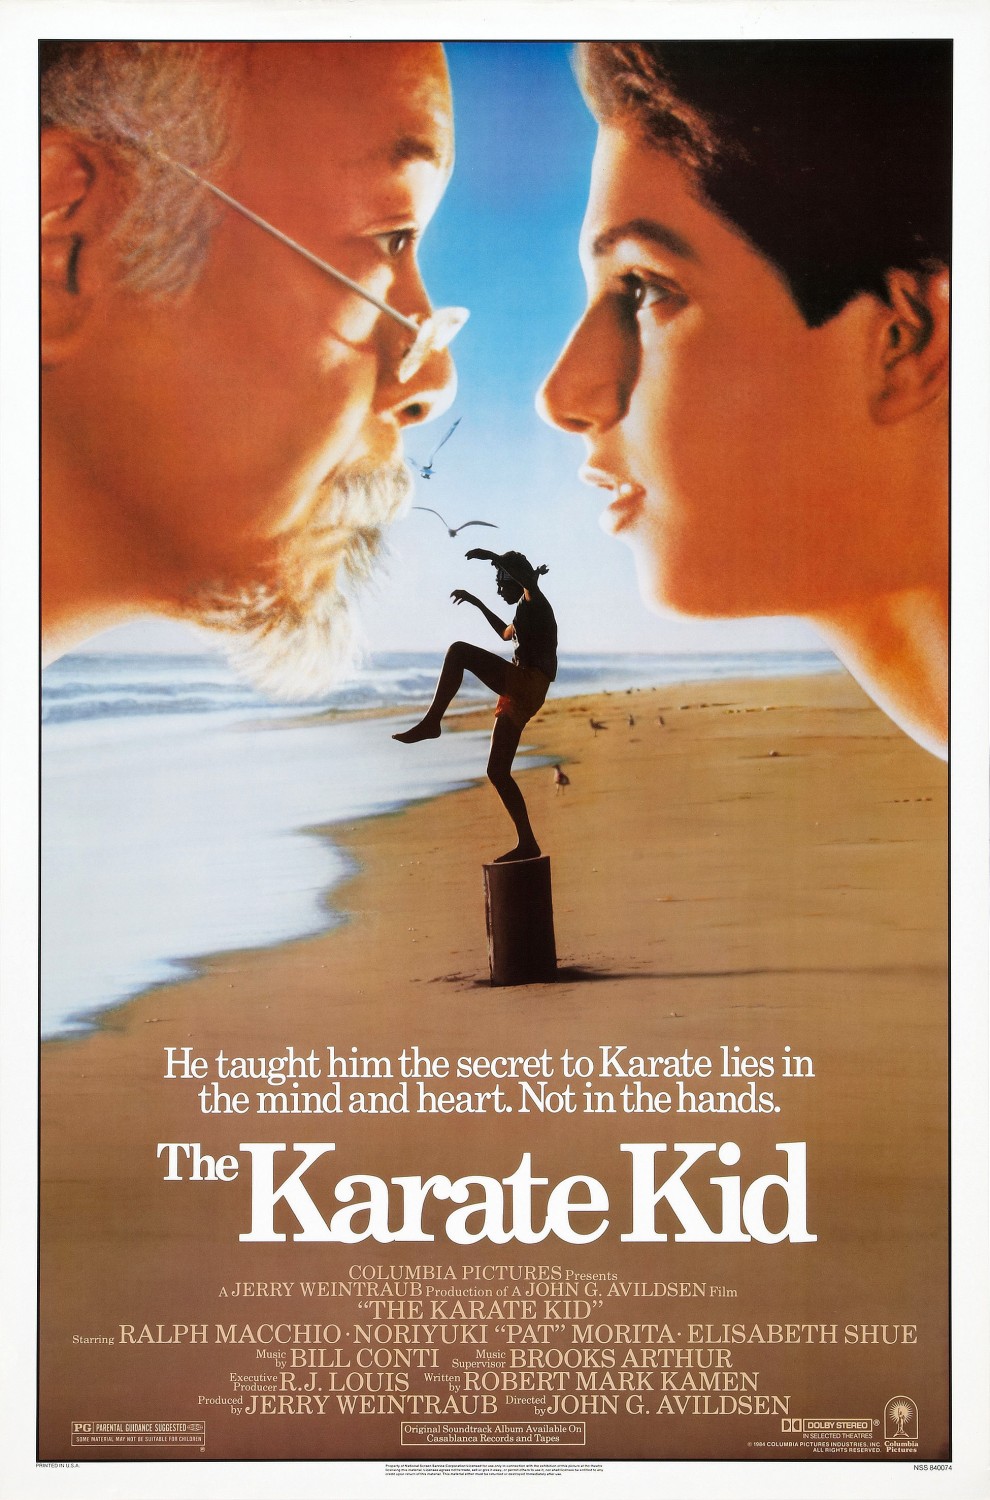 Classic 80s Movie: “The Karate Kid” – Go Into The Story